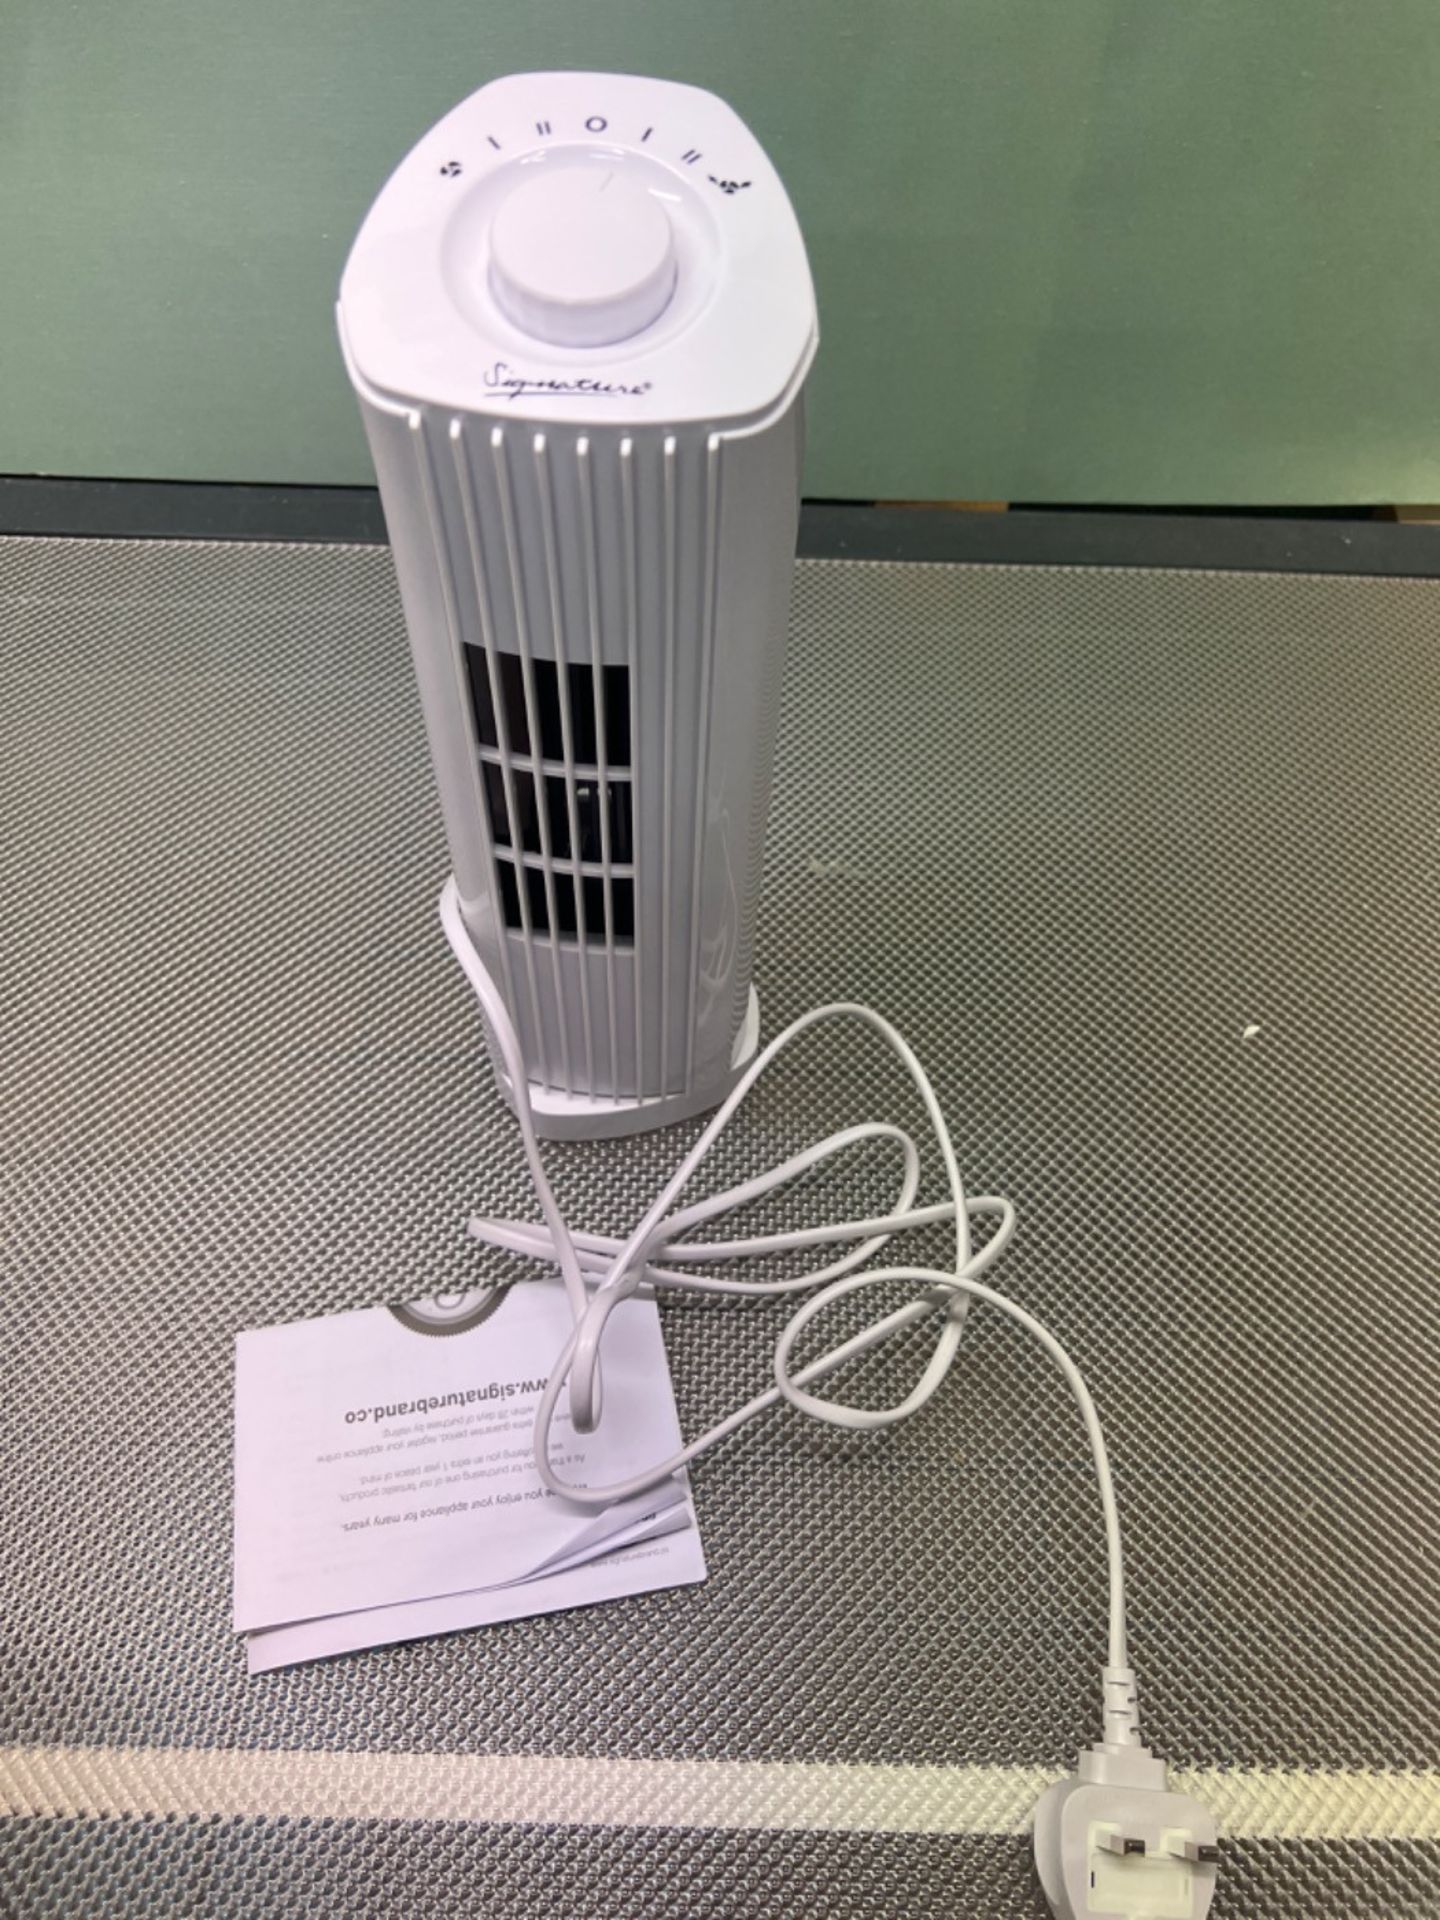 Signature S40005 Portable Mini Tower Fan with 90 Degree Oscillation or Fixed Cold Air Blow Function - Image 3 of 3